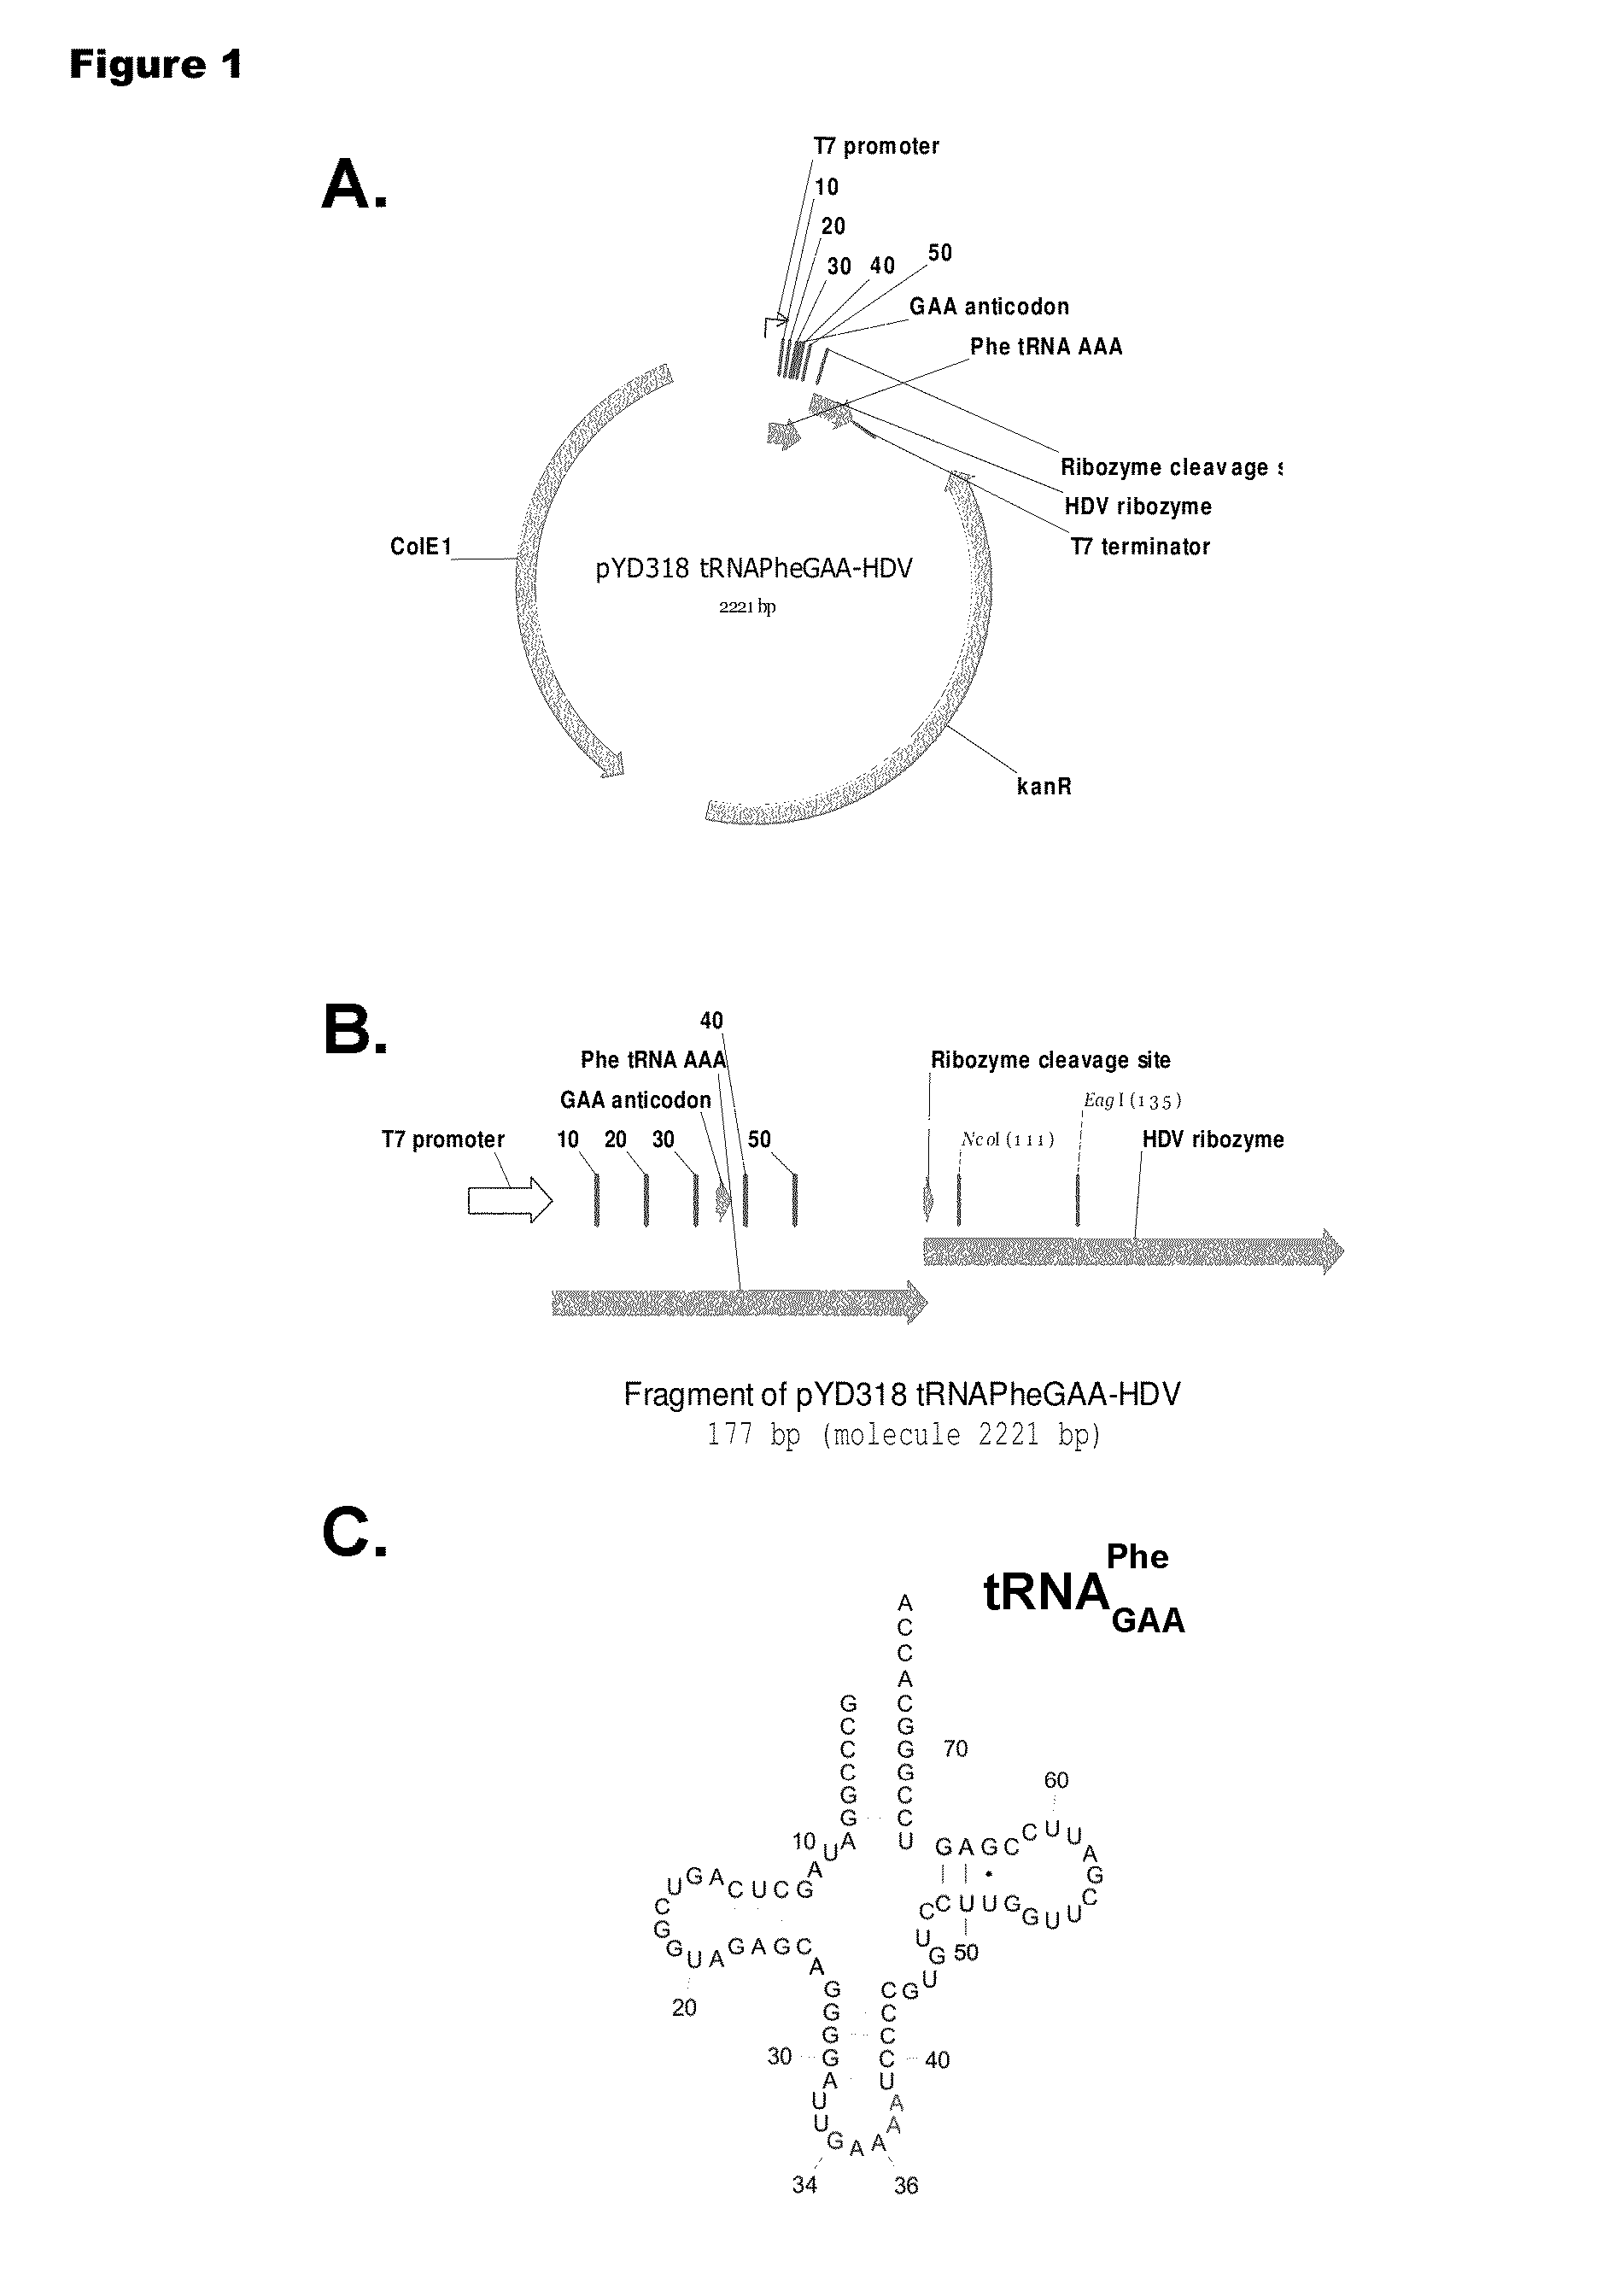 Mono charging system for selectively introducing non-native amino acids into proteins using an in vitro protein synthesis system